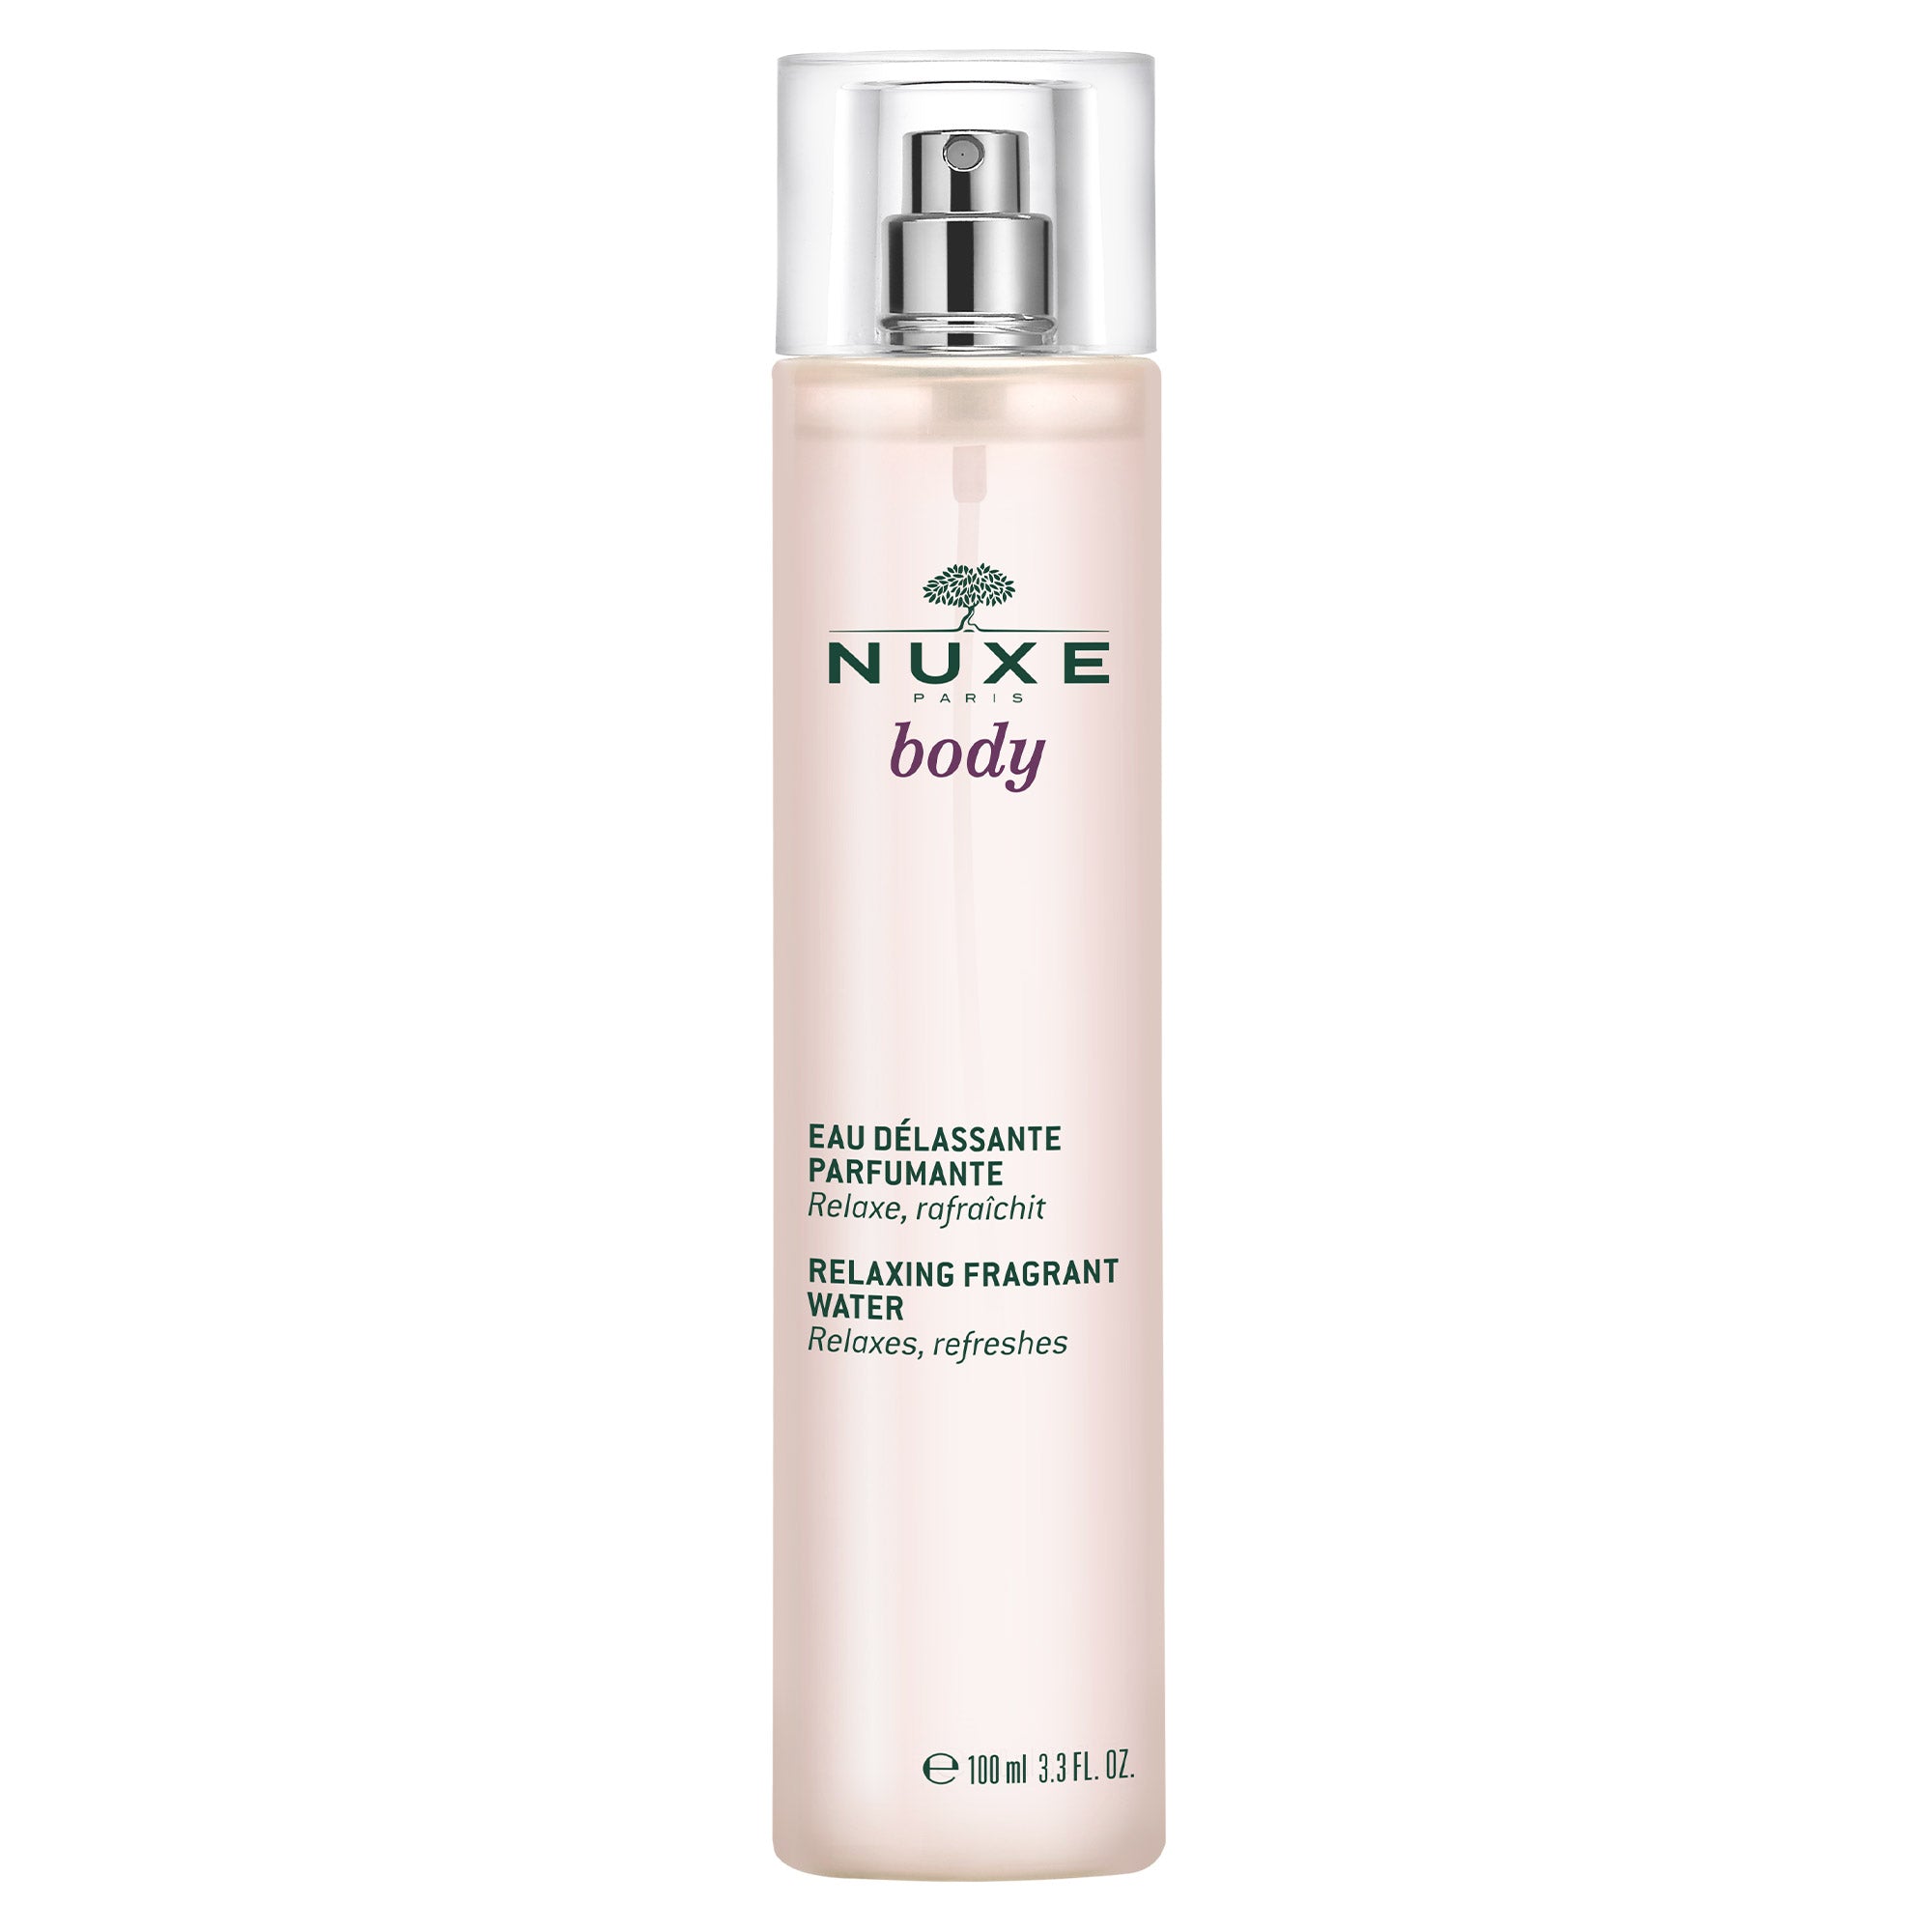 NUXE BODY - RELAXING FRAGRANT WATER 100ml